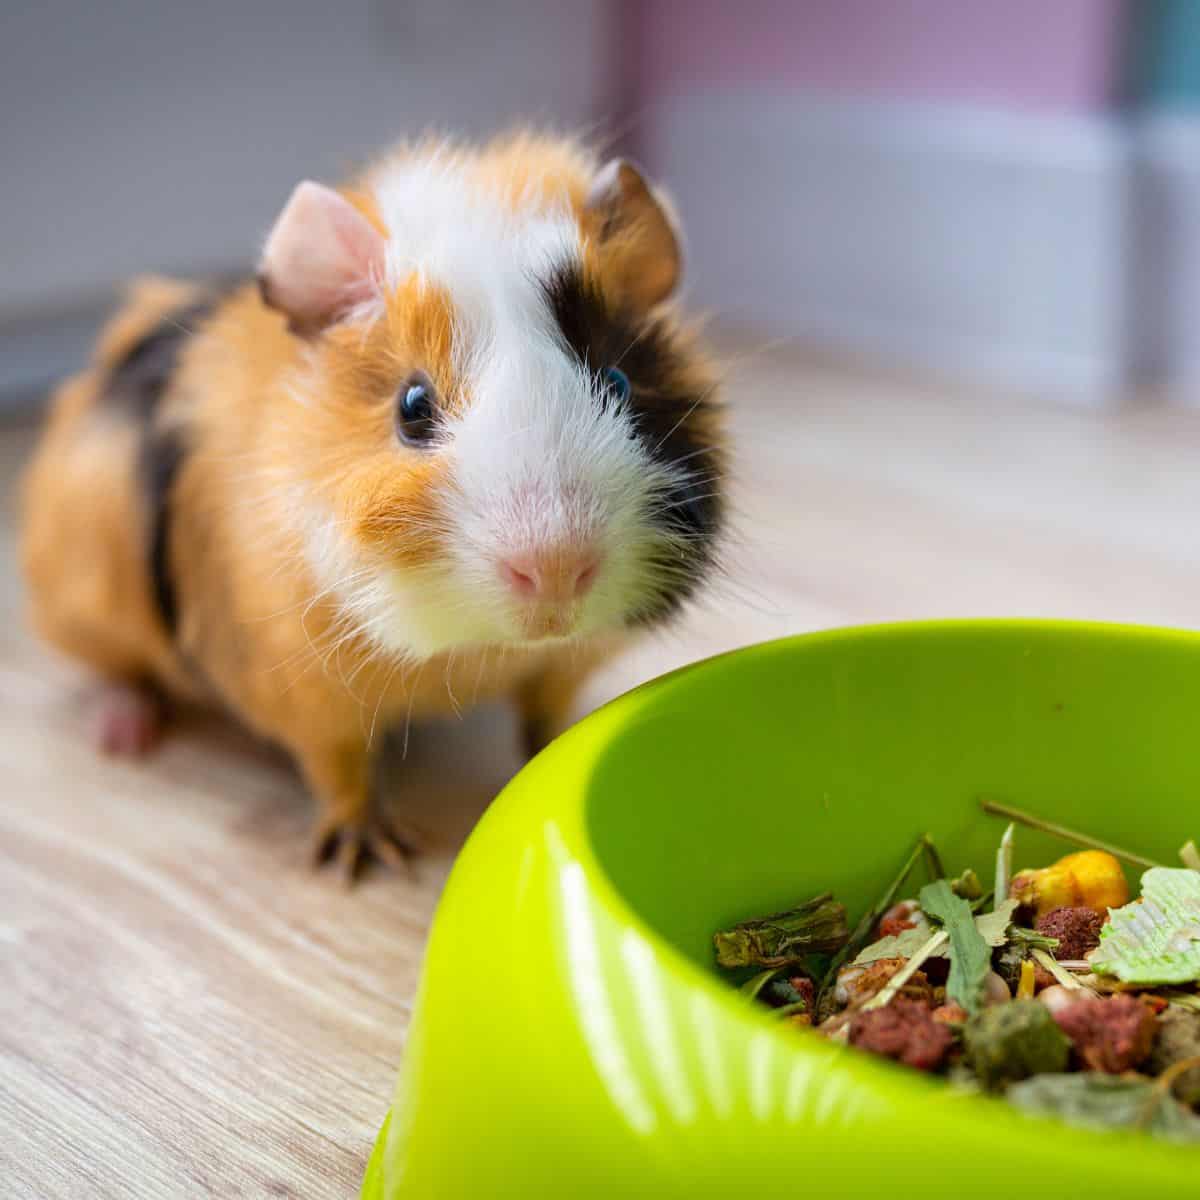 A guinea pig standing excitedly next to a bowl of food.